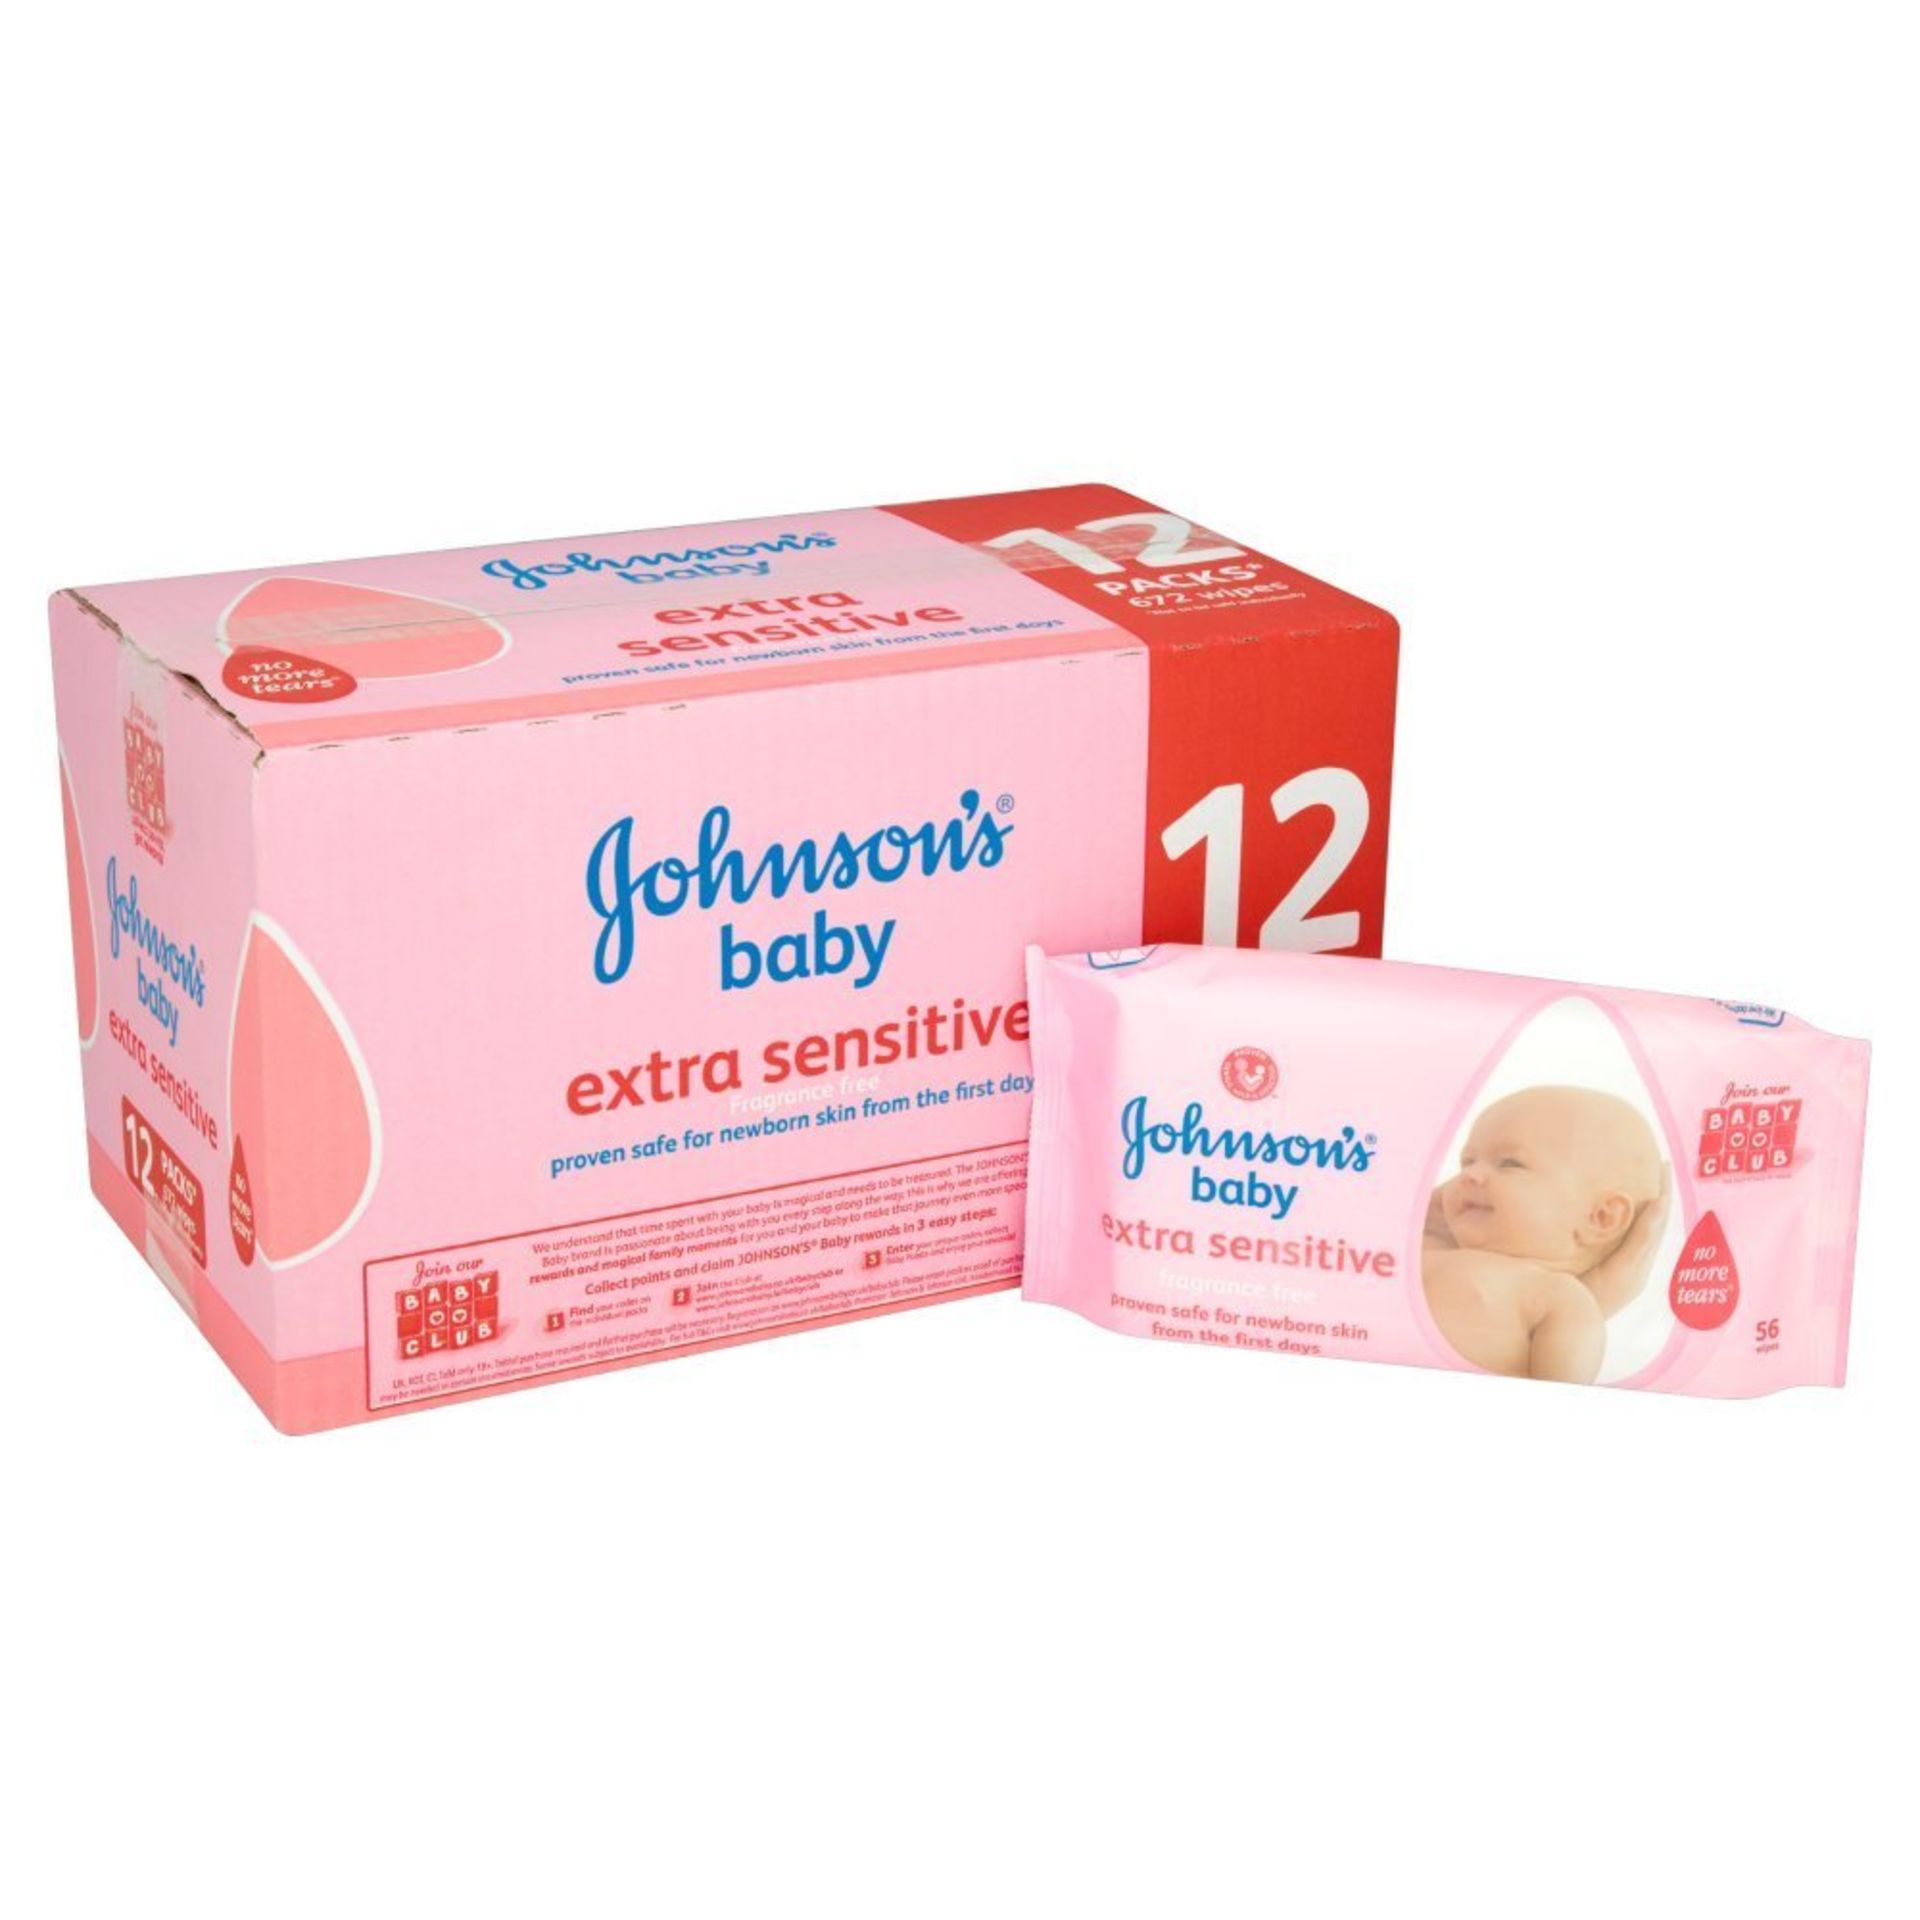 1 Carton Containing Baby Products Various Nappies and Wipes- Total Online Retail Value £ 109+ - Image 3 of 7